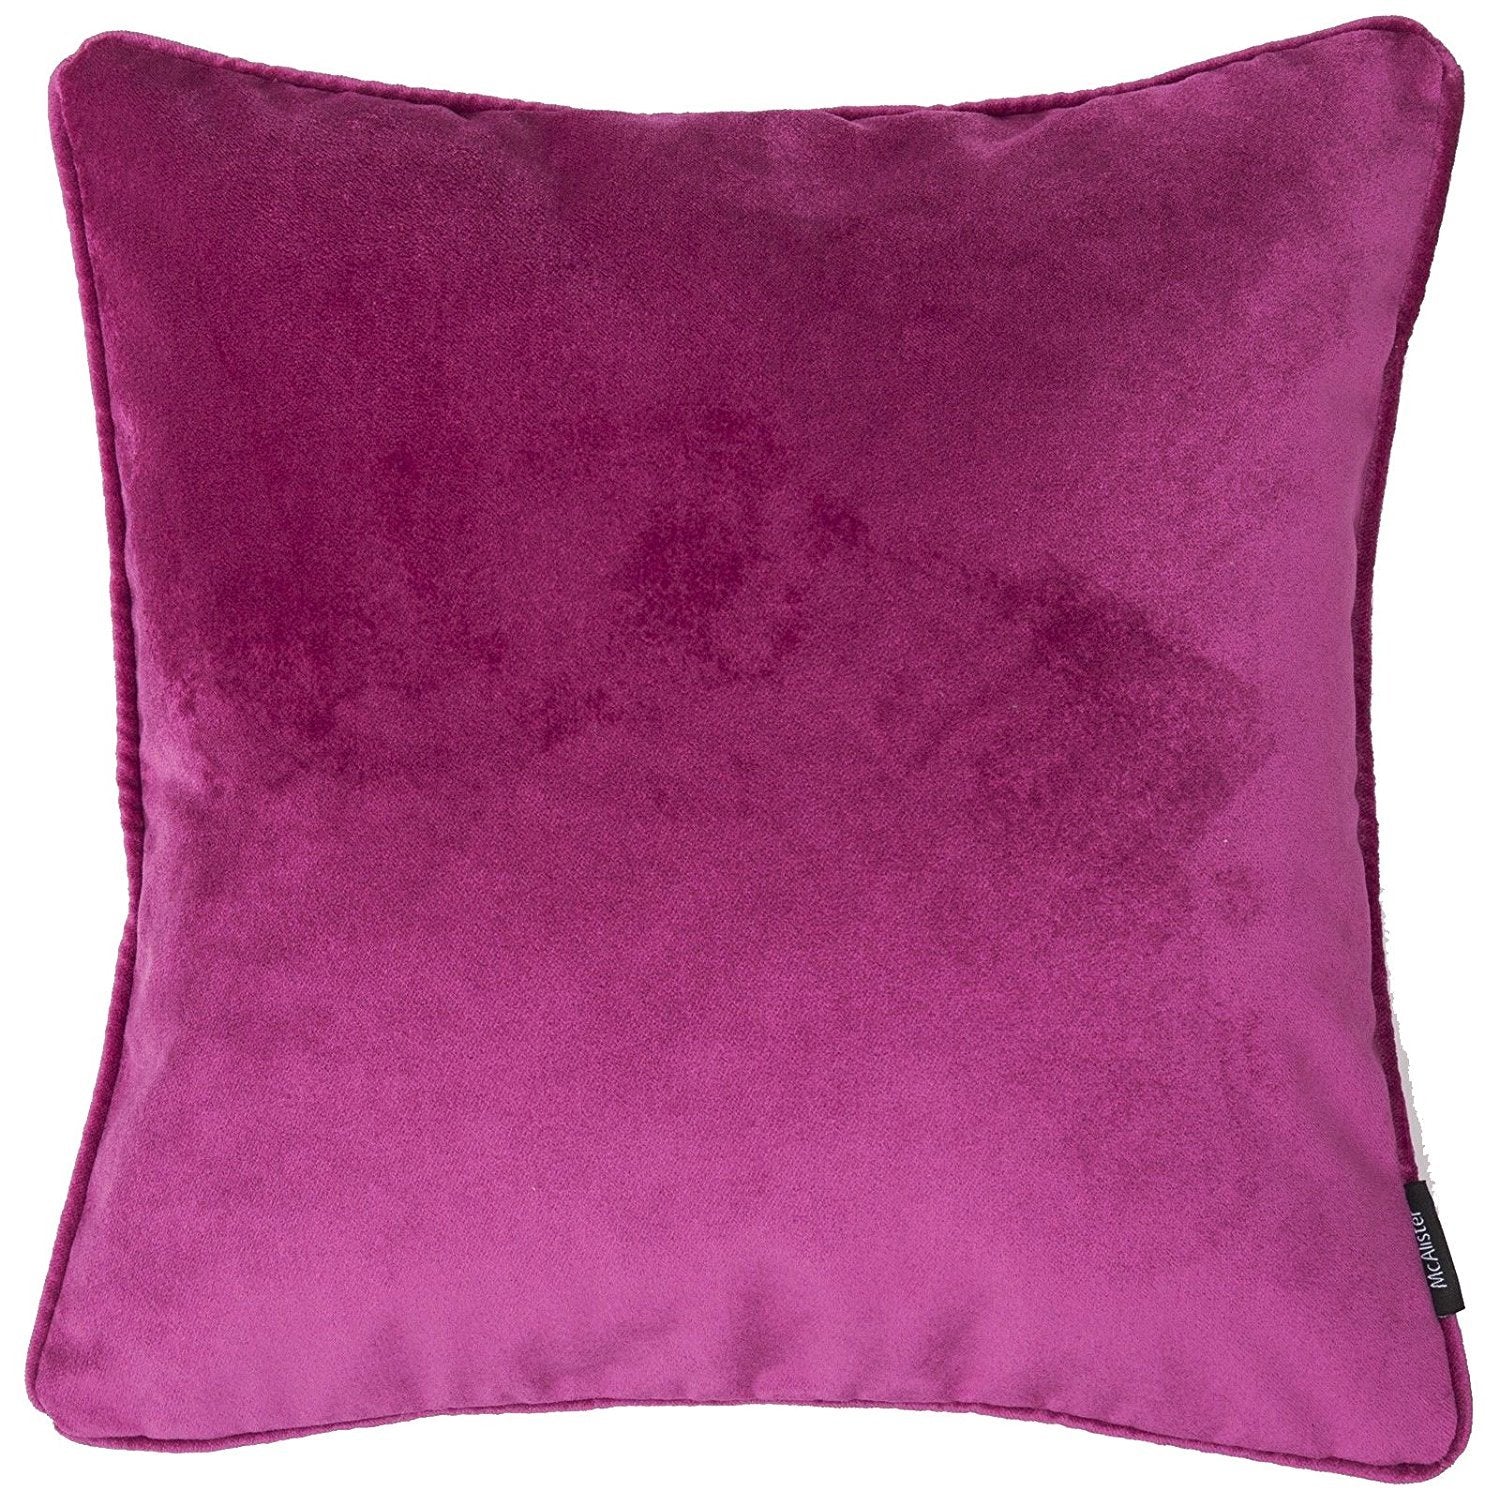 McAlister Textiles Matt Fuchsia Pink Piped Velvet Cushion Cushions and Covers Cover Only 43cm x 43cm 